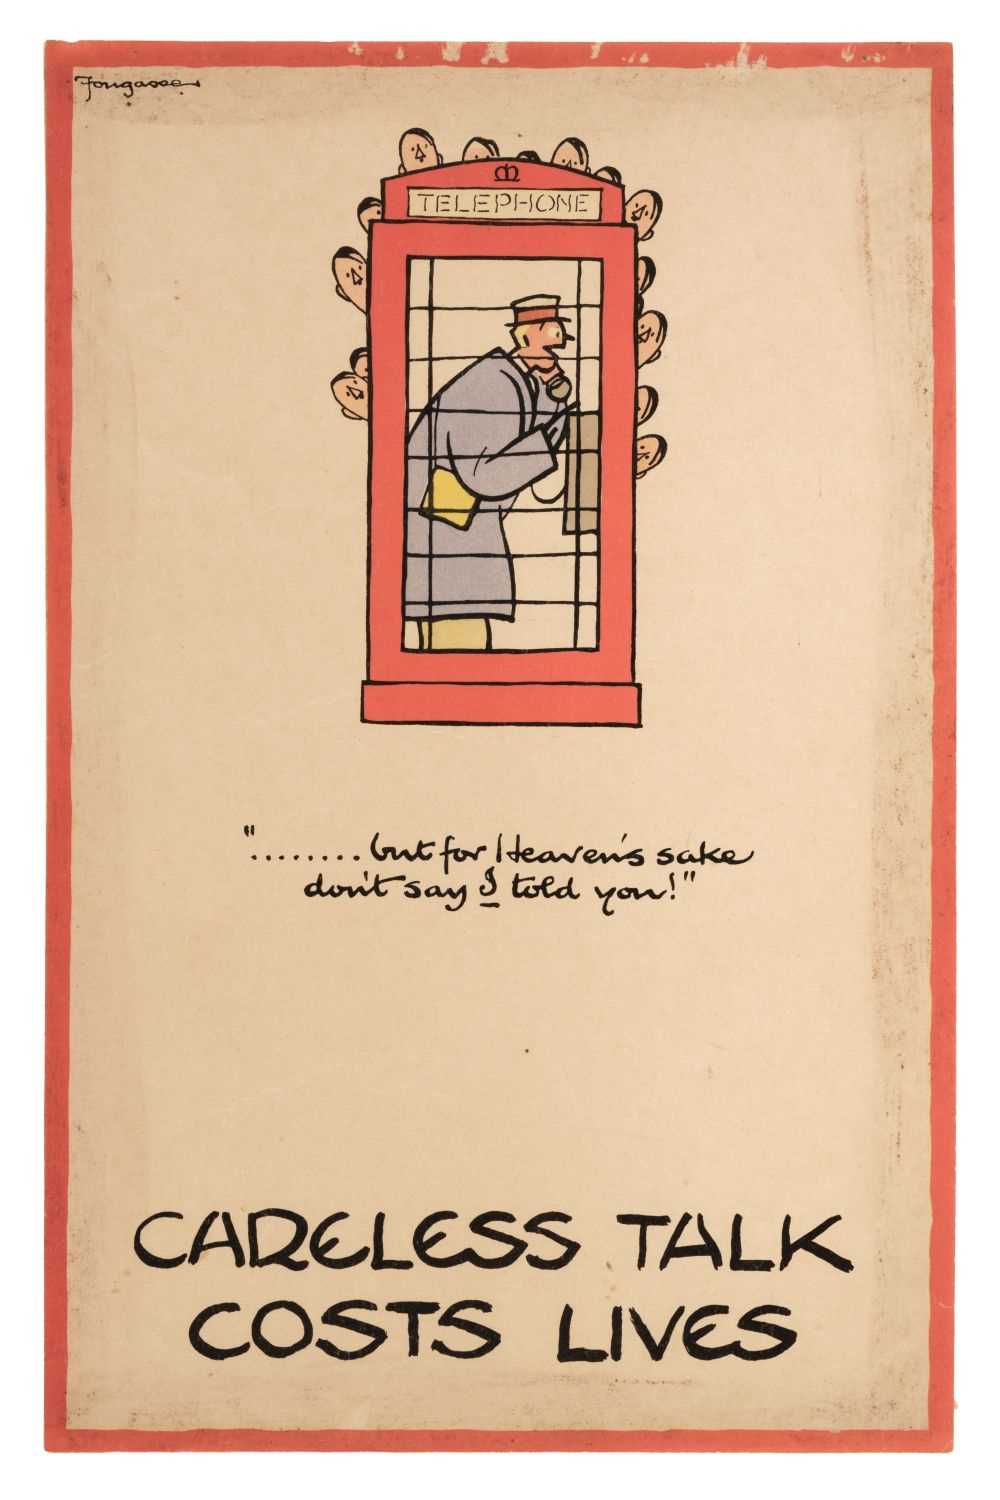 Lot 273 - Fougasse (pseud., really Cyril Kenneth Bird). Careless Talk Costs Lives, circa 1940